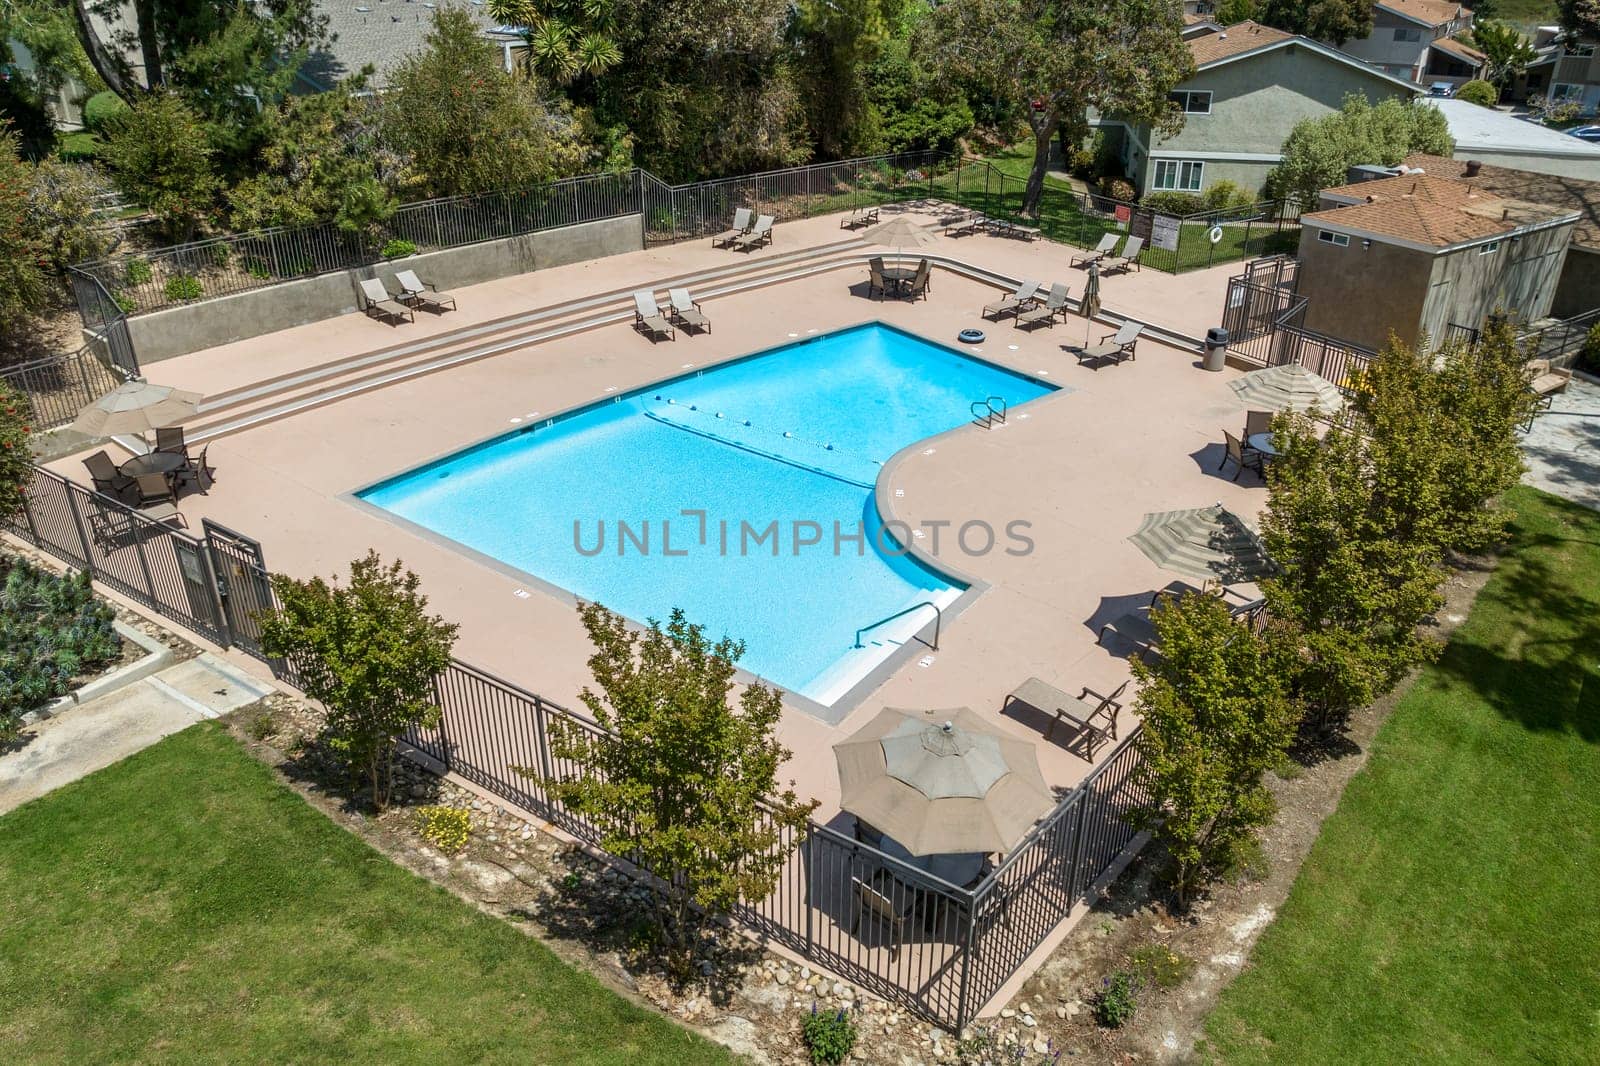 Aerial view of recreational facilities with pool in private residential community in La Jolla by Bonandbon